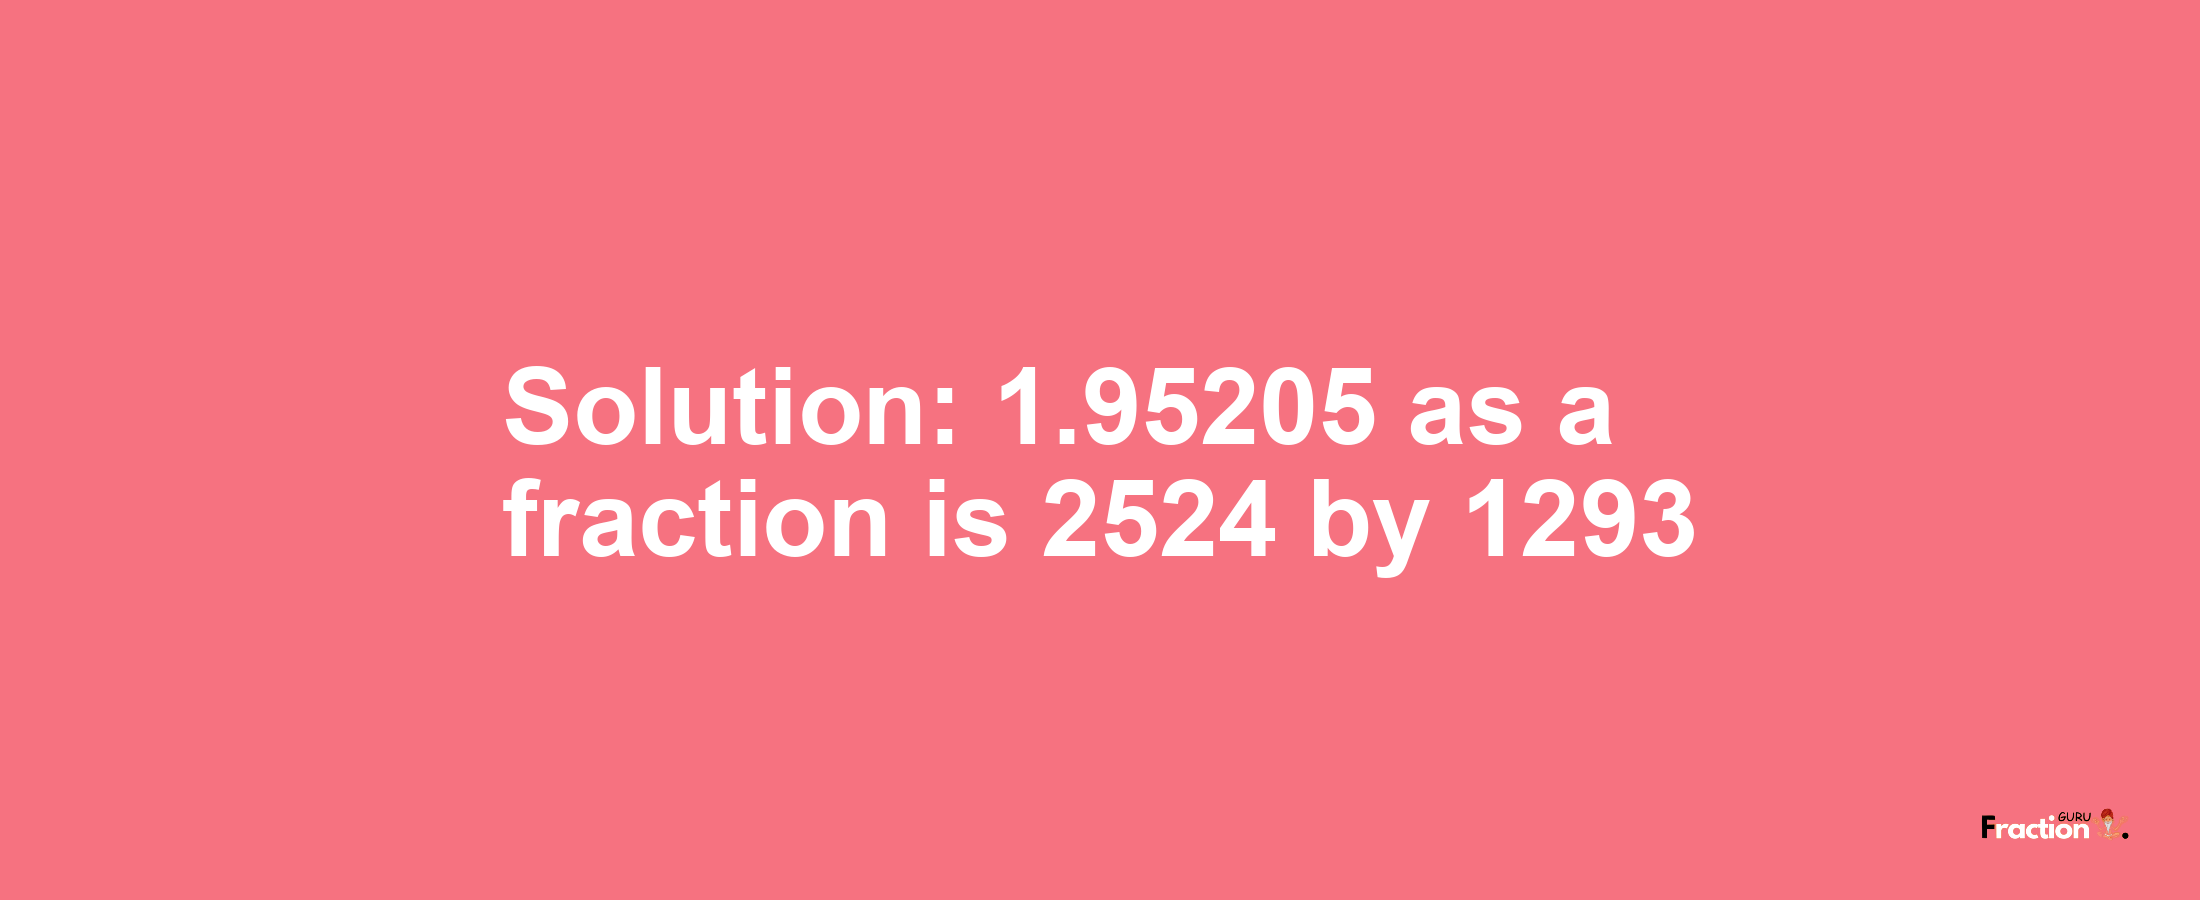 Solution:1.95205 as a fraction is 2524/1293